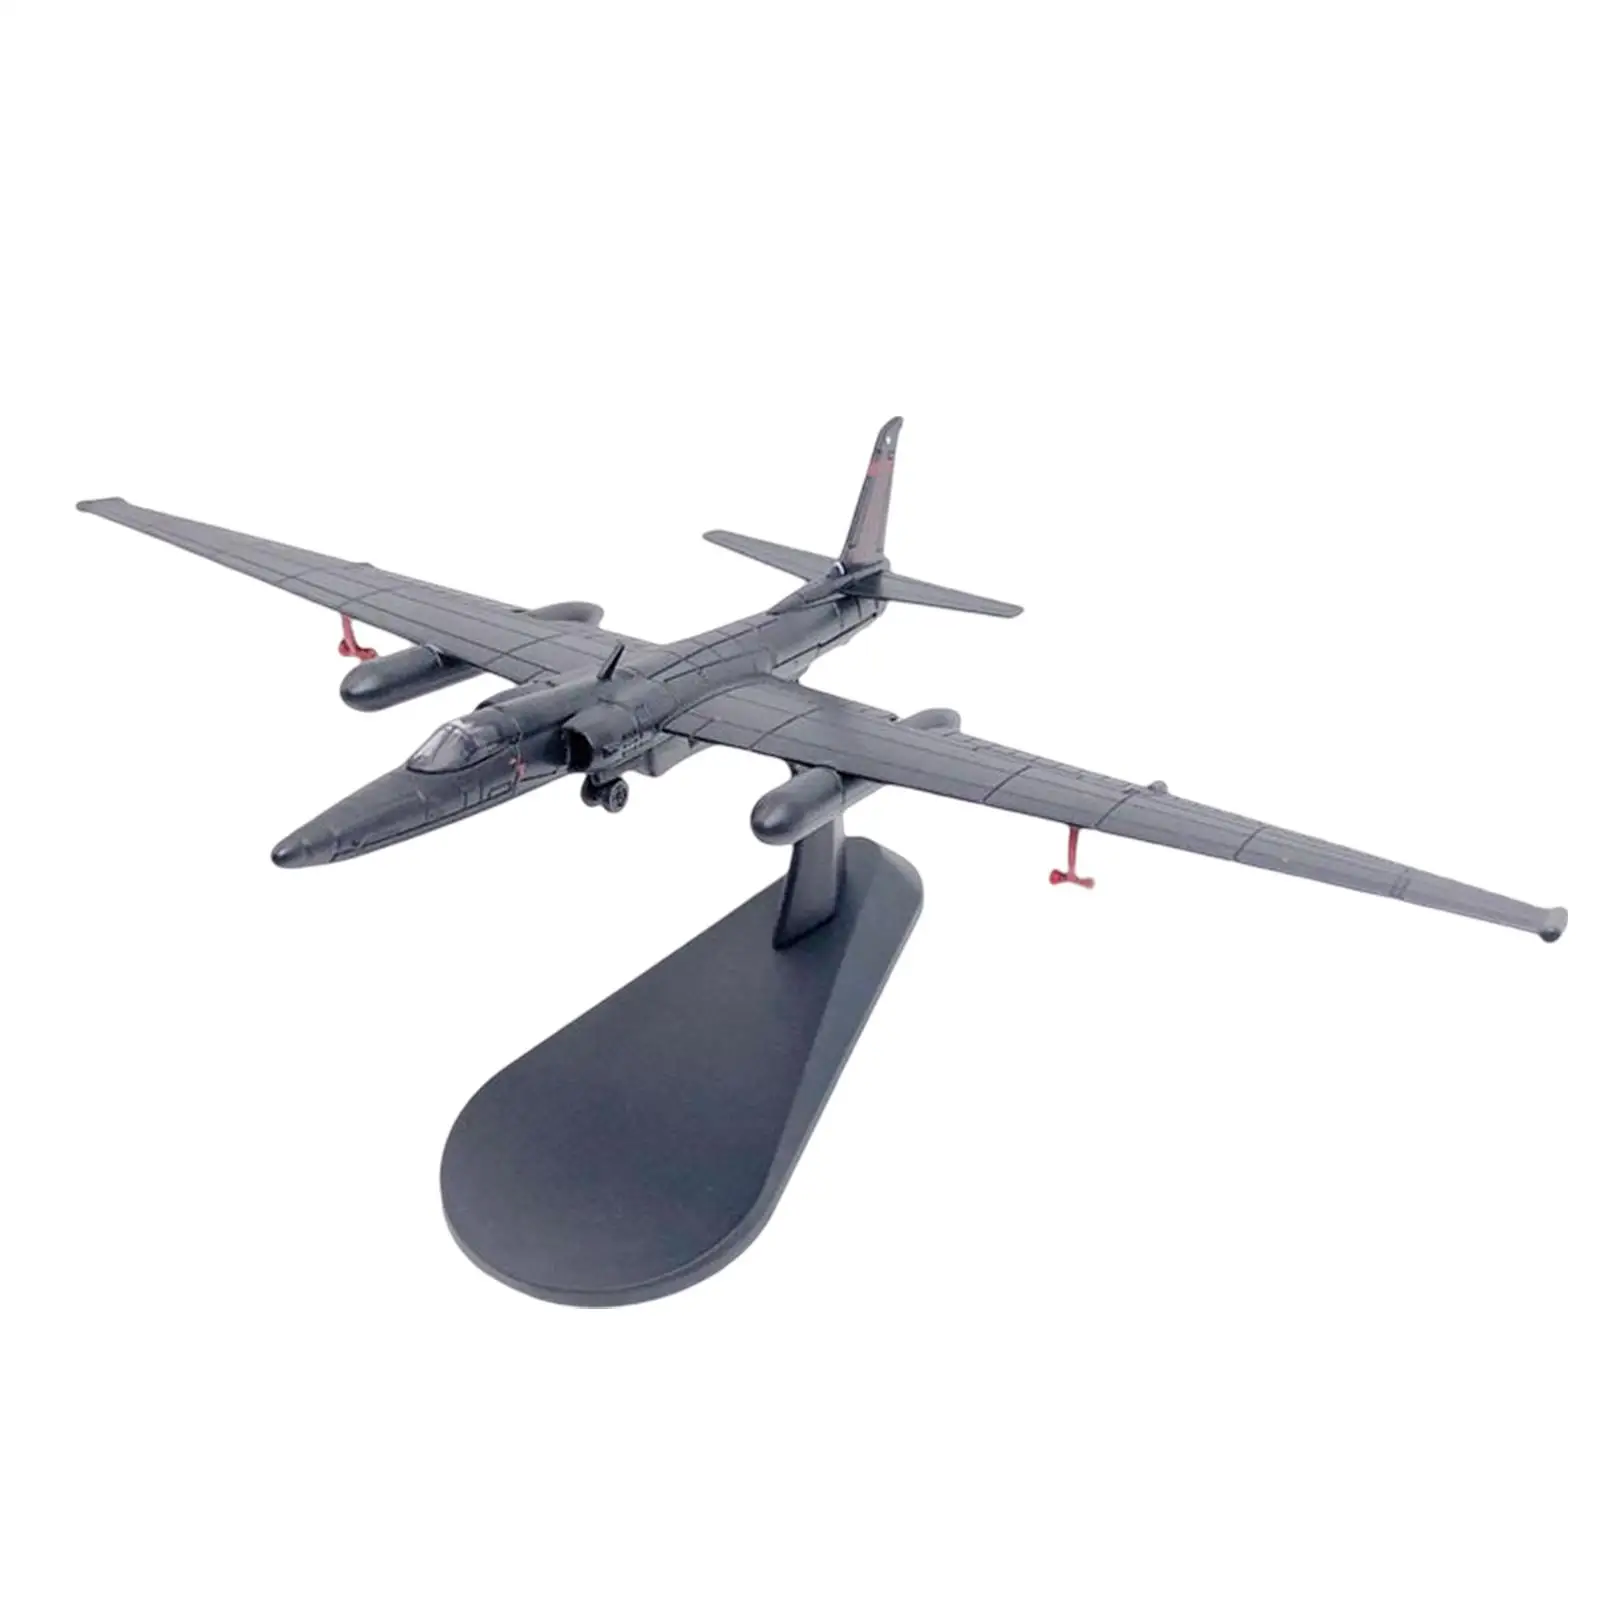 1/144 U2 Reconnaissance Aircraft Model with Stand, Aviation Collectibles